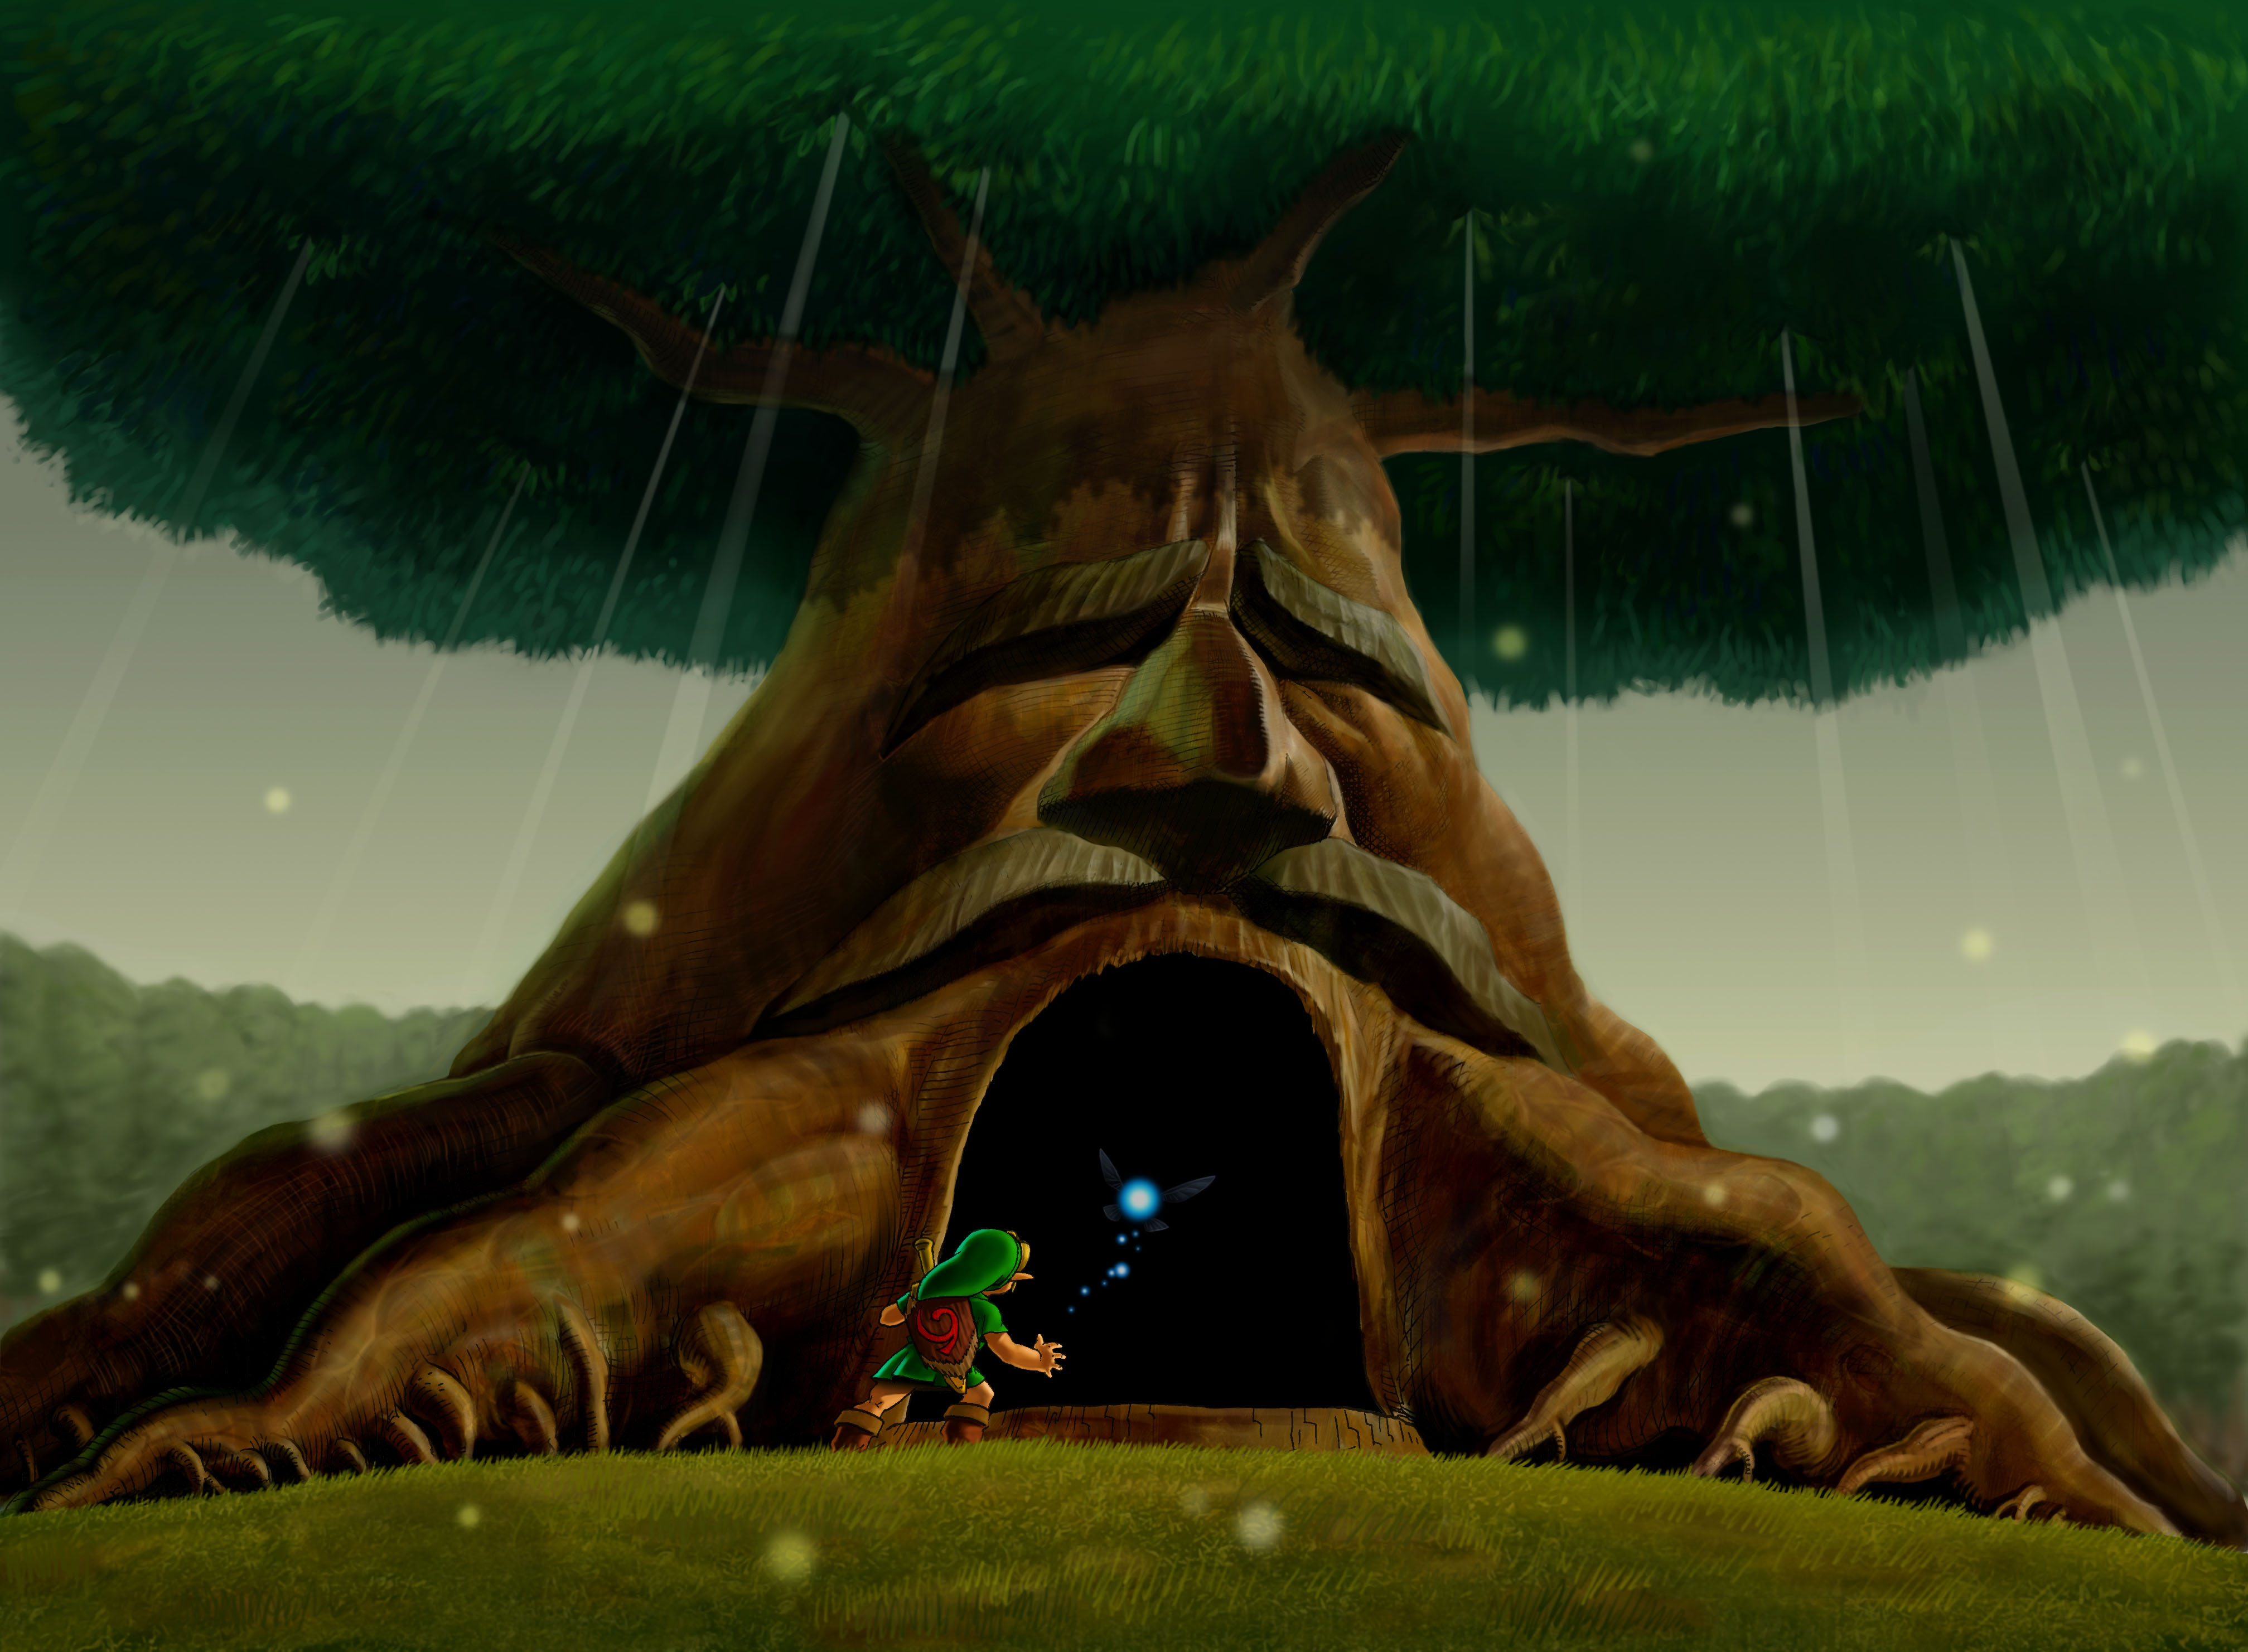 Ocarina Of Time's Deku Tree Dungeon Is Still My All-Time Top Gaming Moment